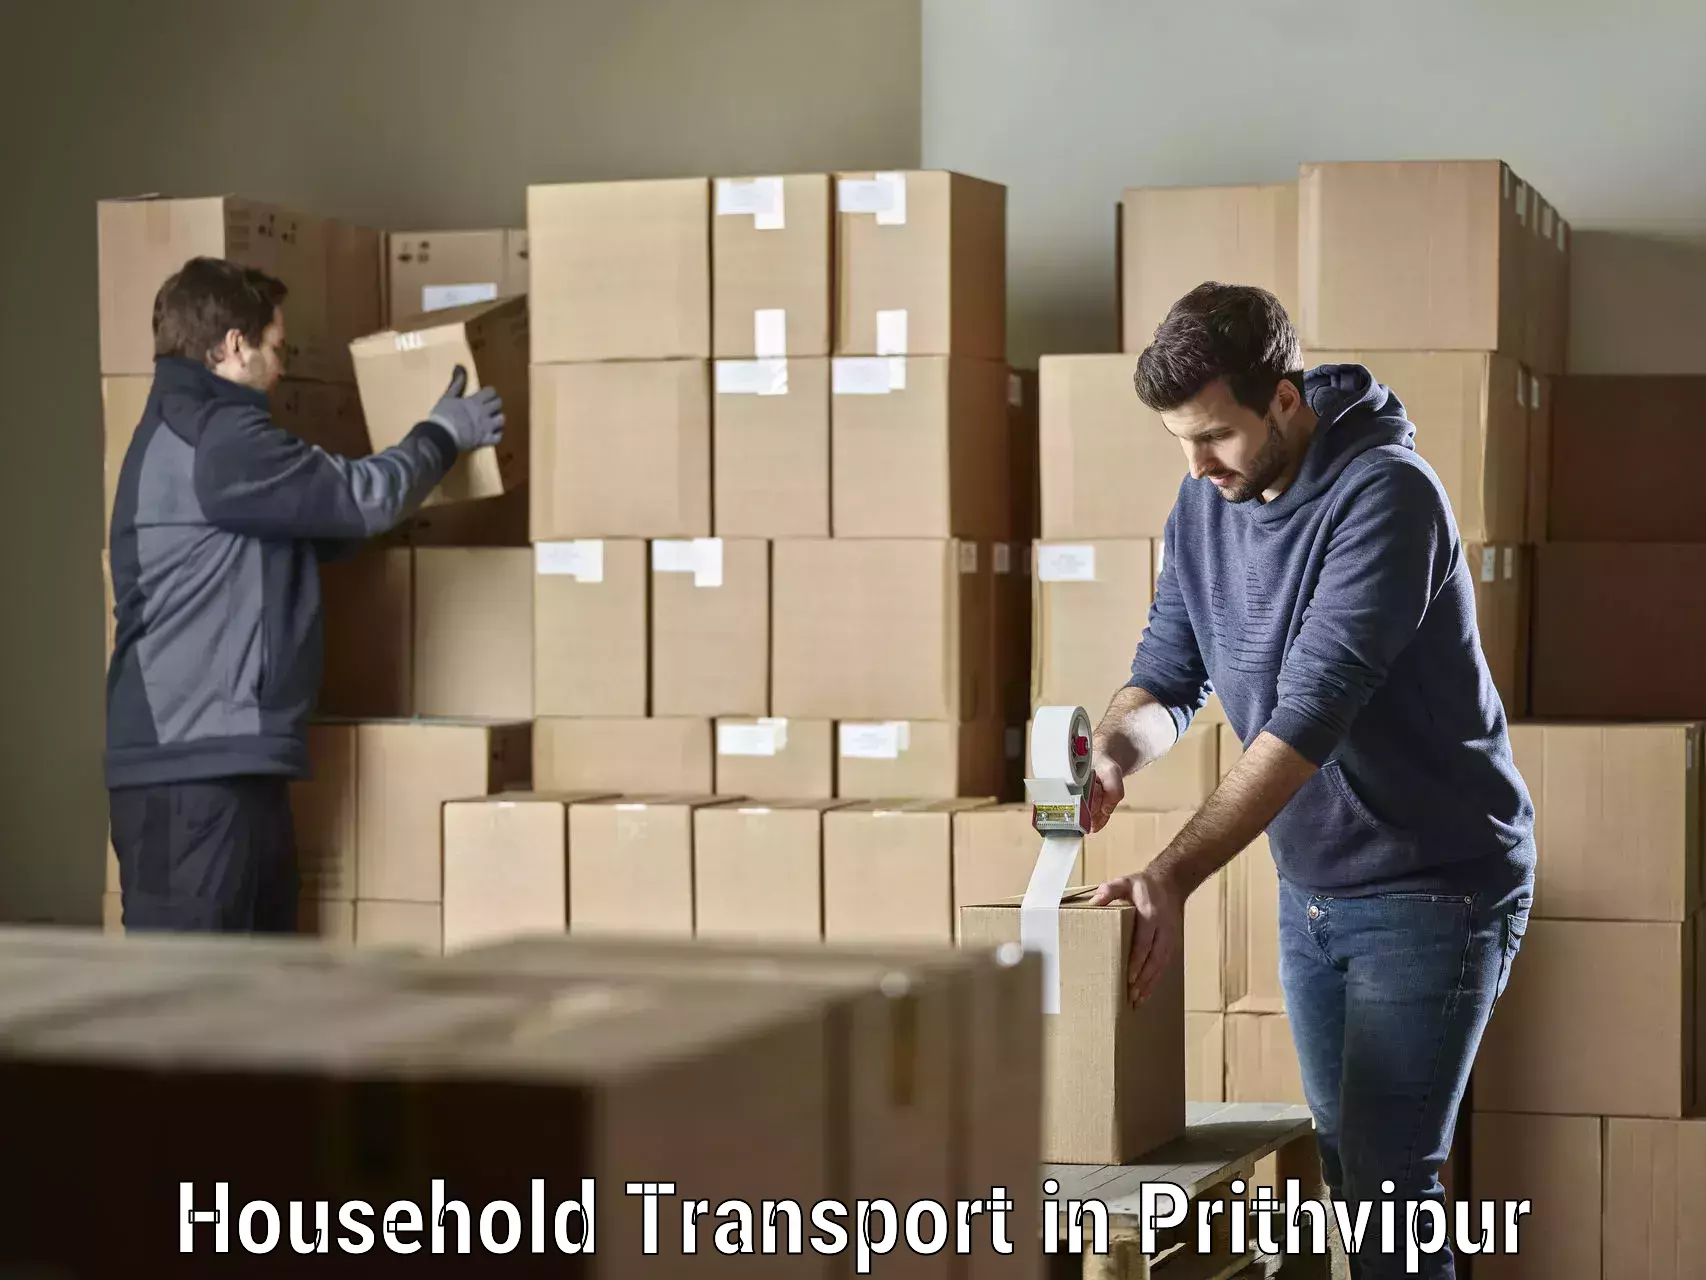 Quality relocation assistance in Prithvipur